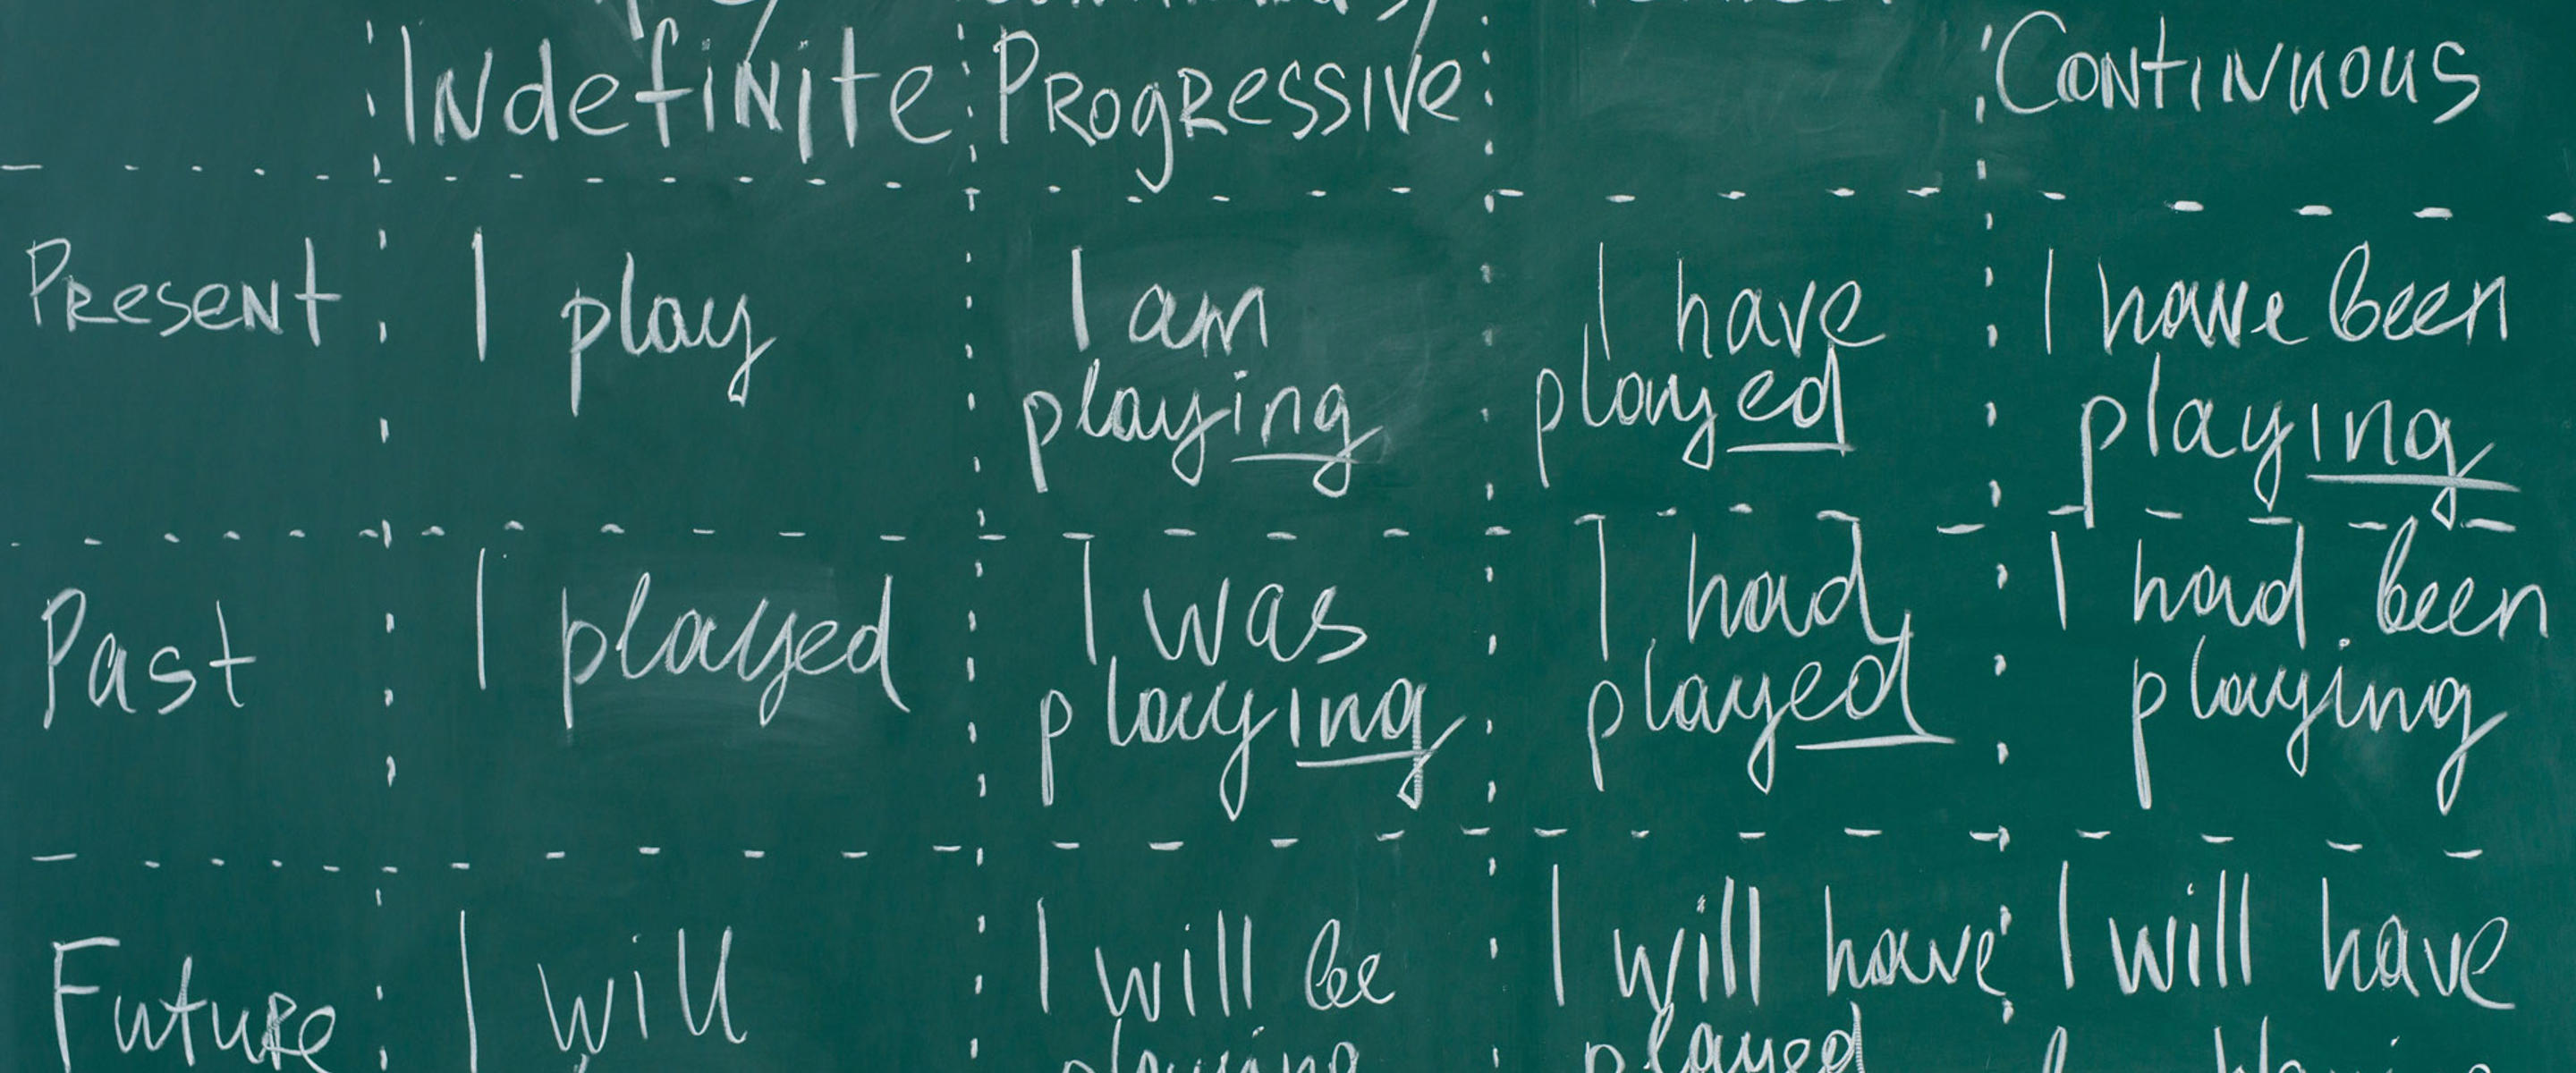 Past, present and future tense English words on a blackboard 